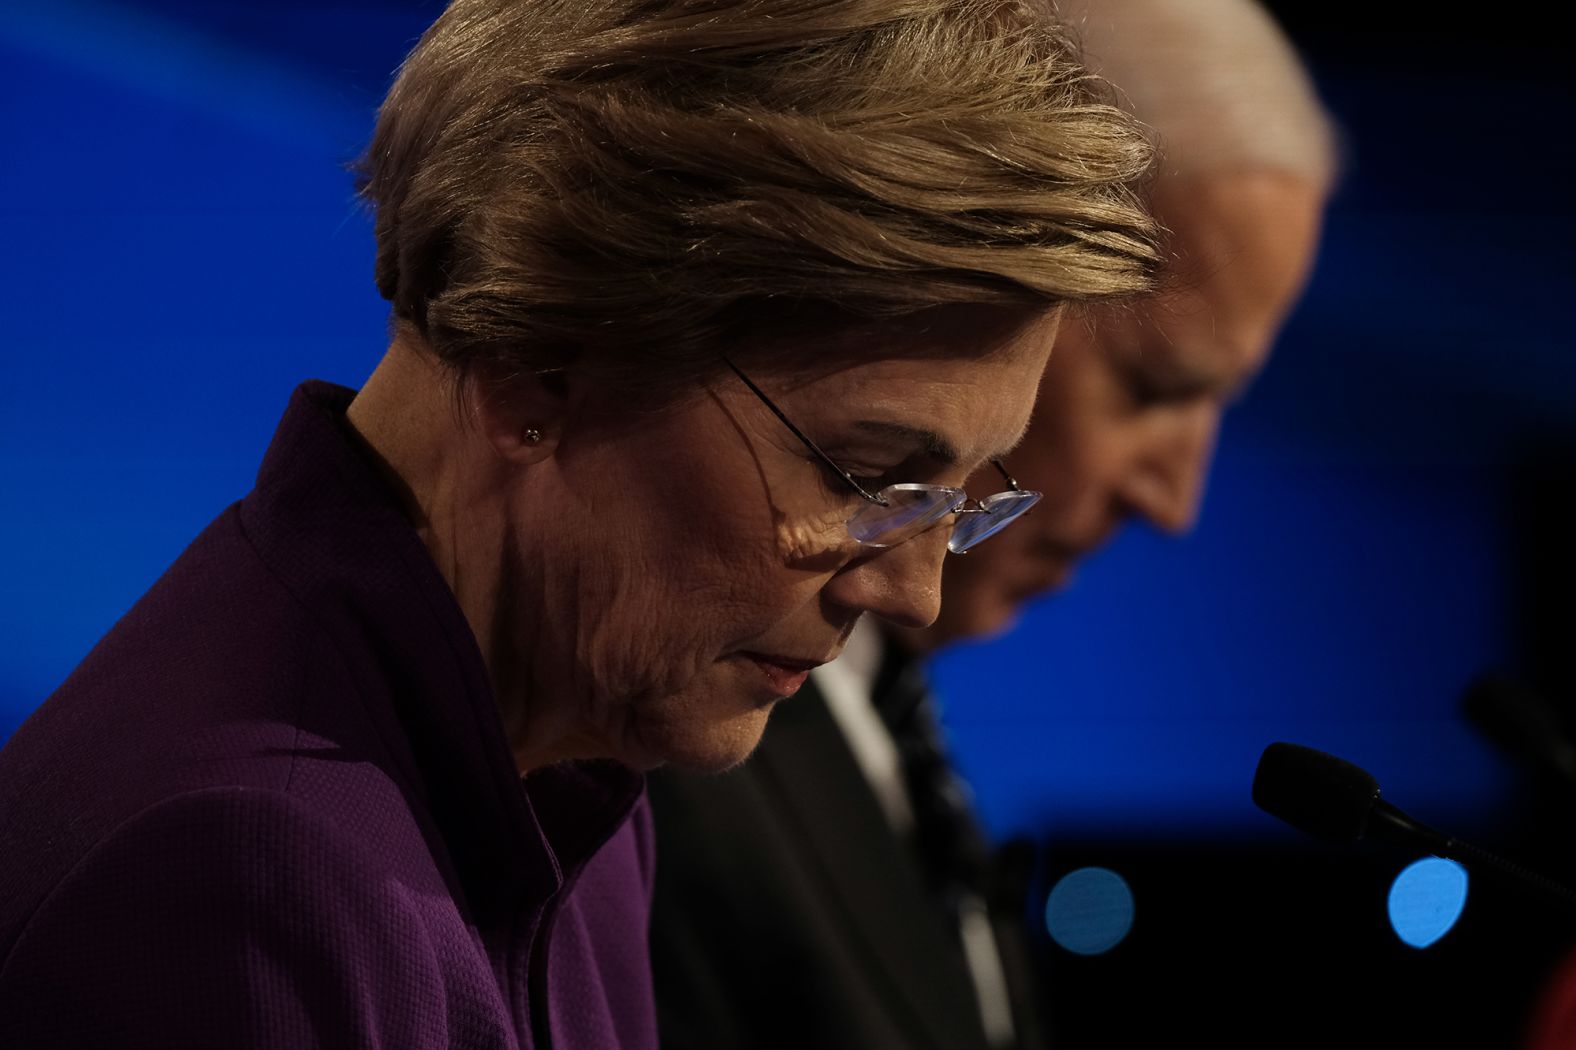 Warren and Biden look down at their notes during the debate.